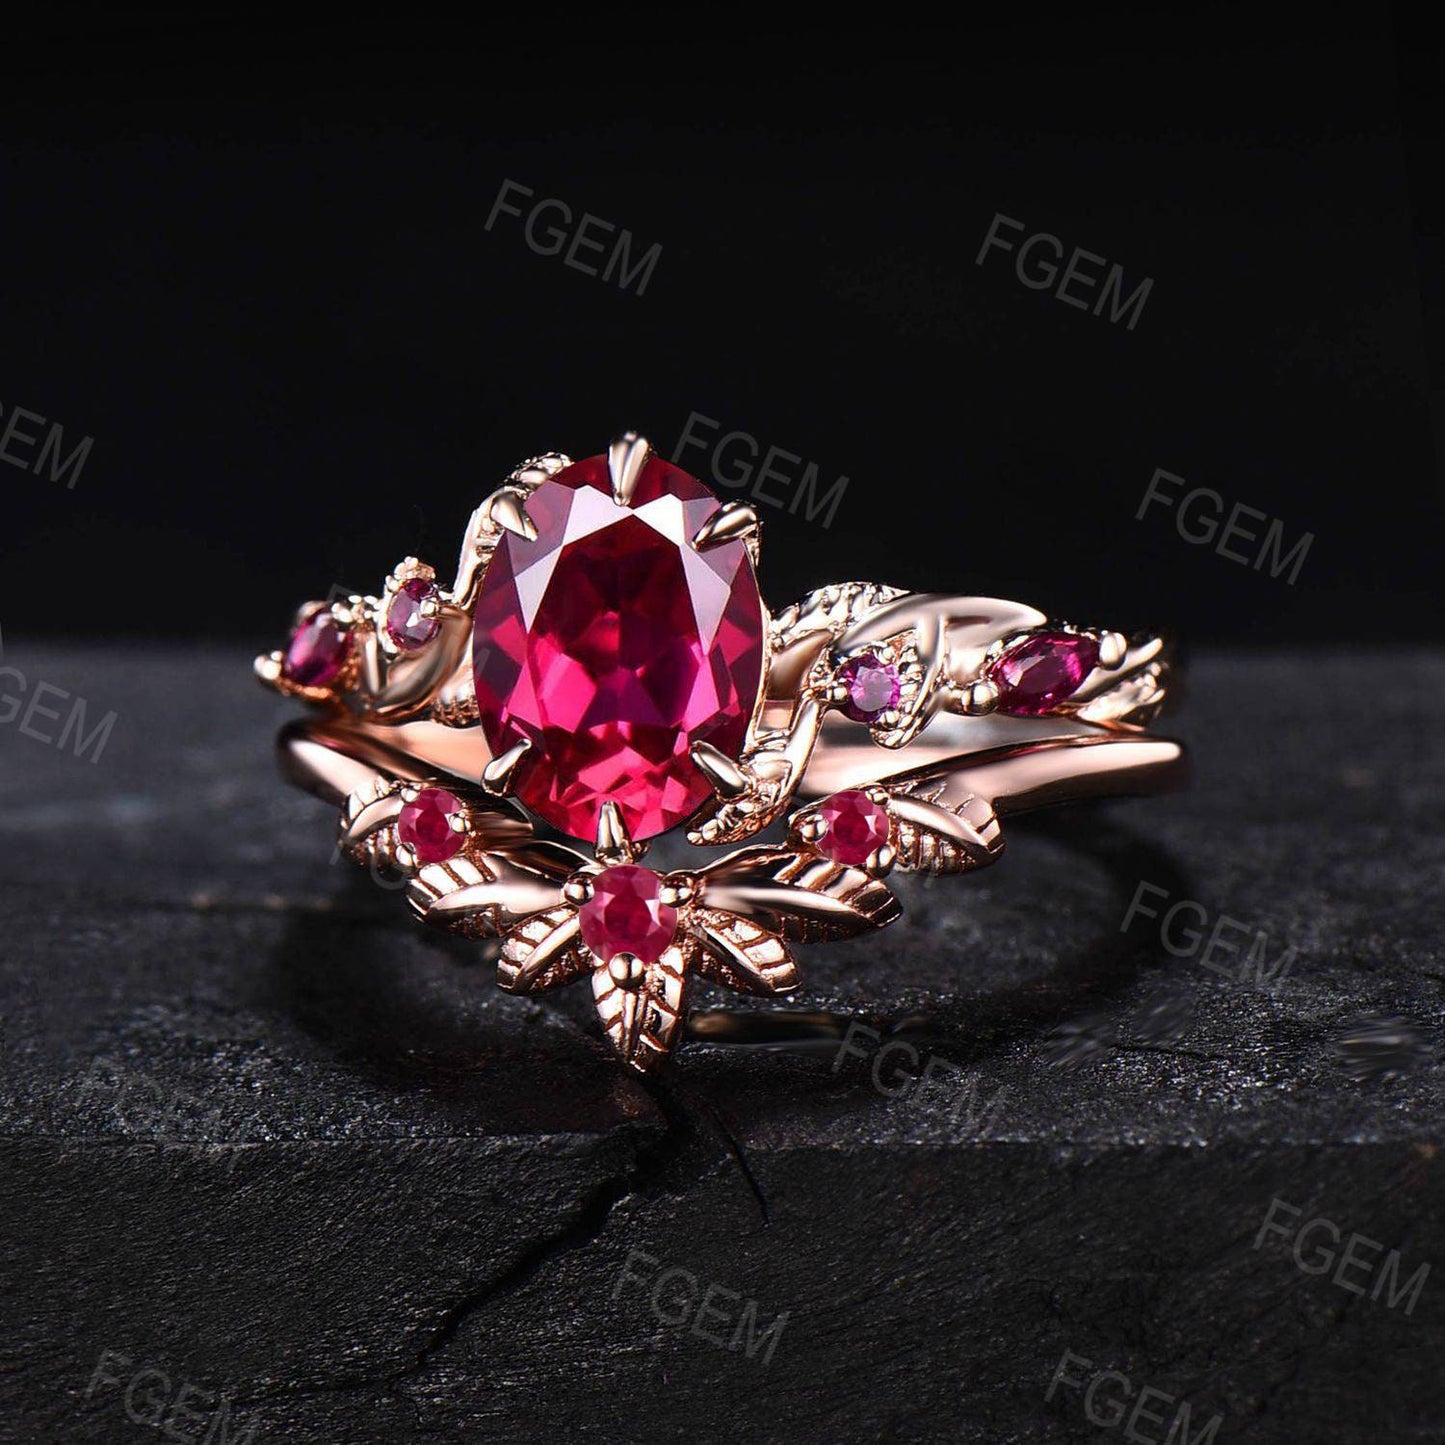 1.5ct Oval Nature Ruby Gemstone Jewelry 10K Rose Gold Twig Leaf Ruby Engagement Ring Set Unique Anniversary Ring Women July Birthstone Gift